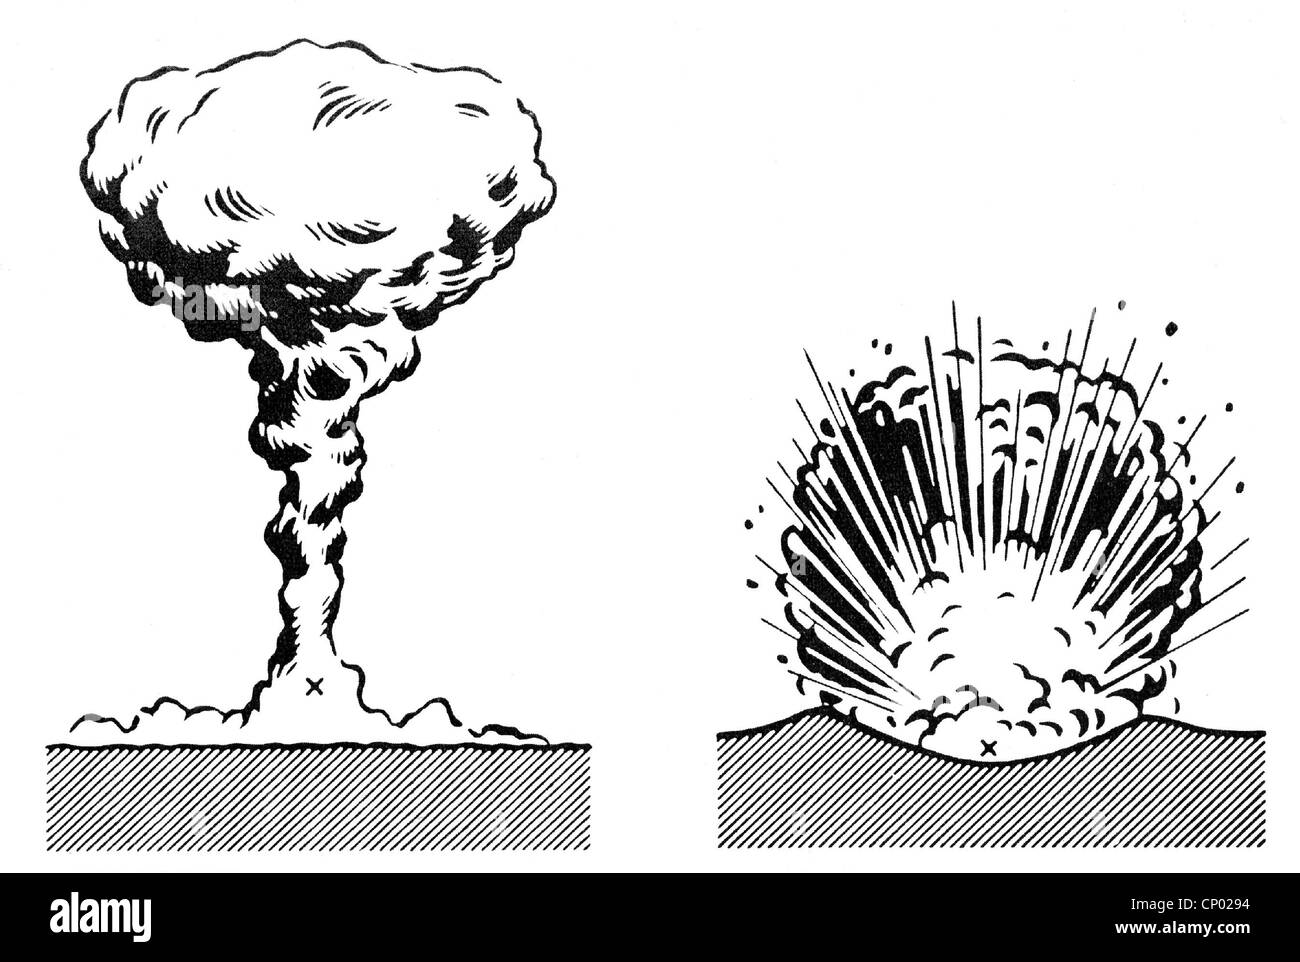 atomic bomb explosion drawing